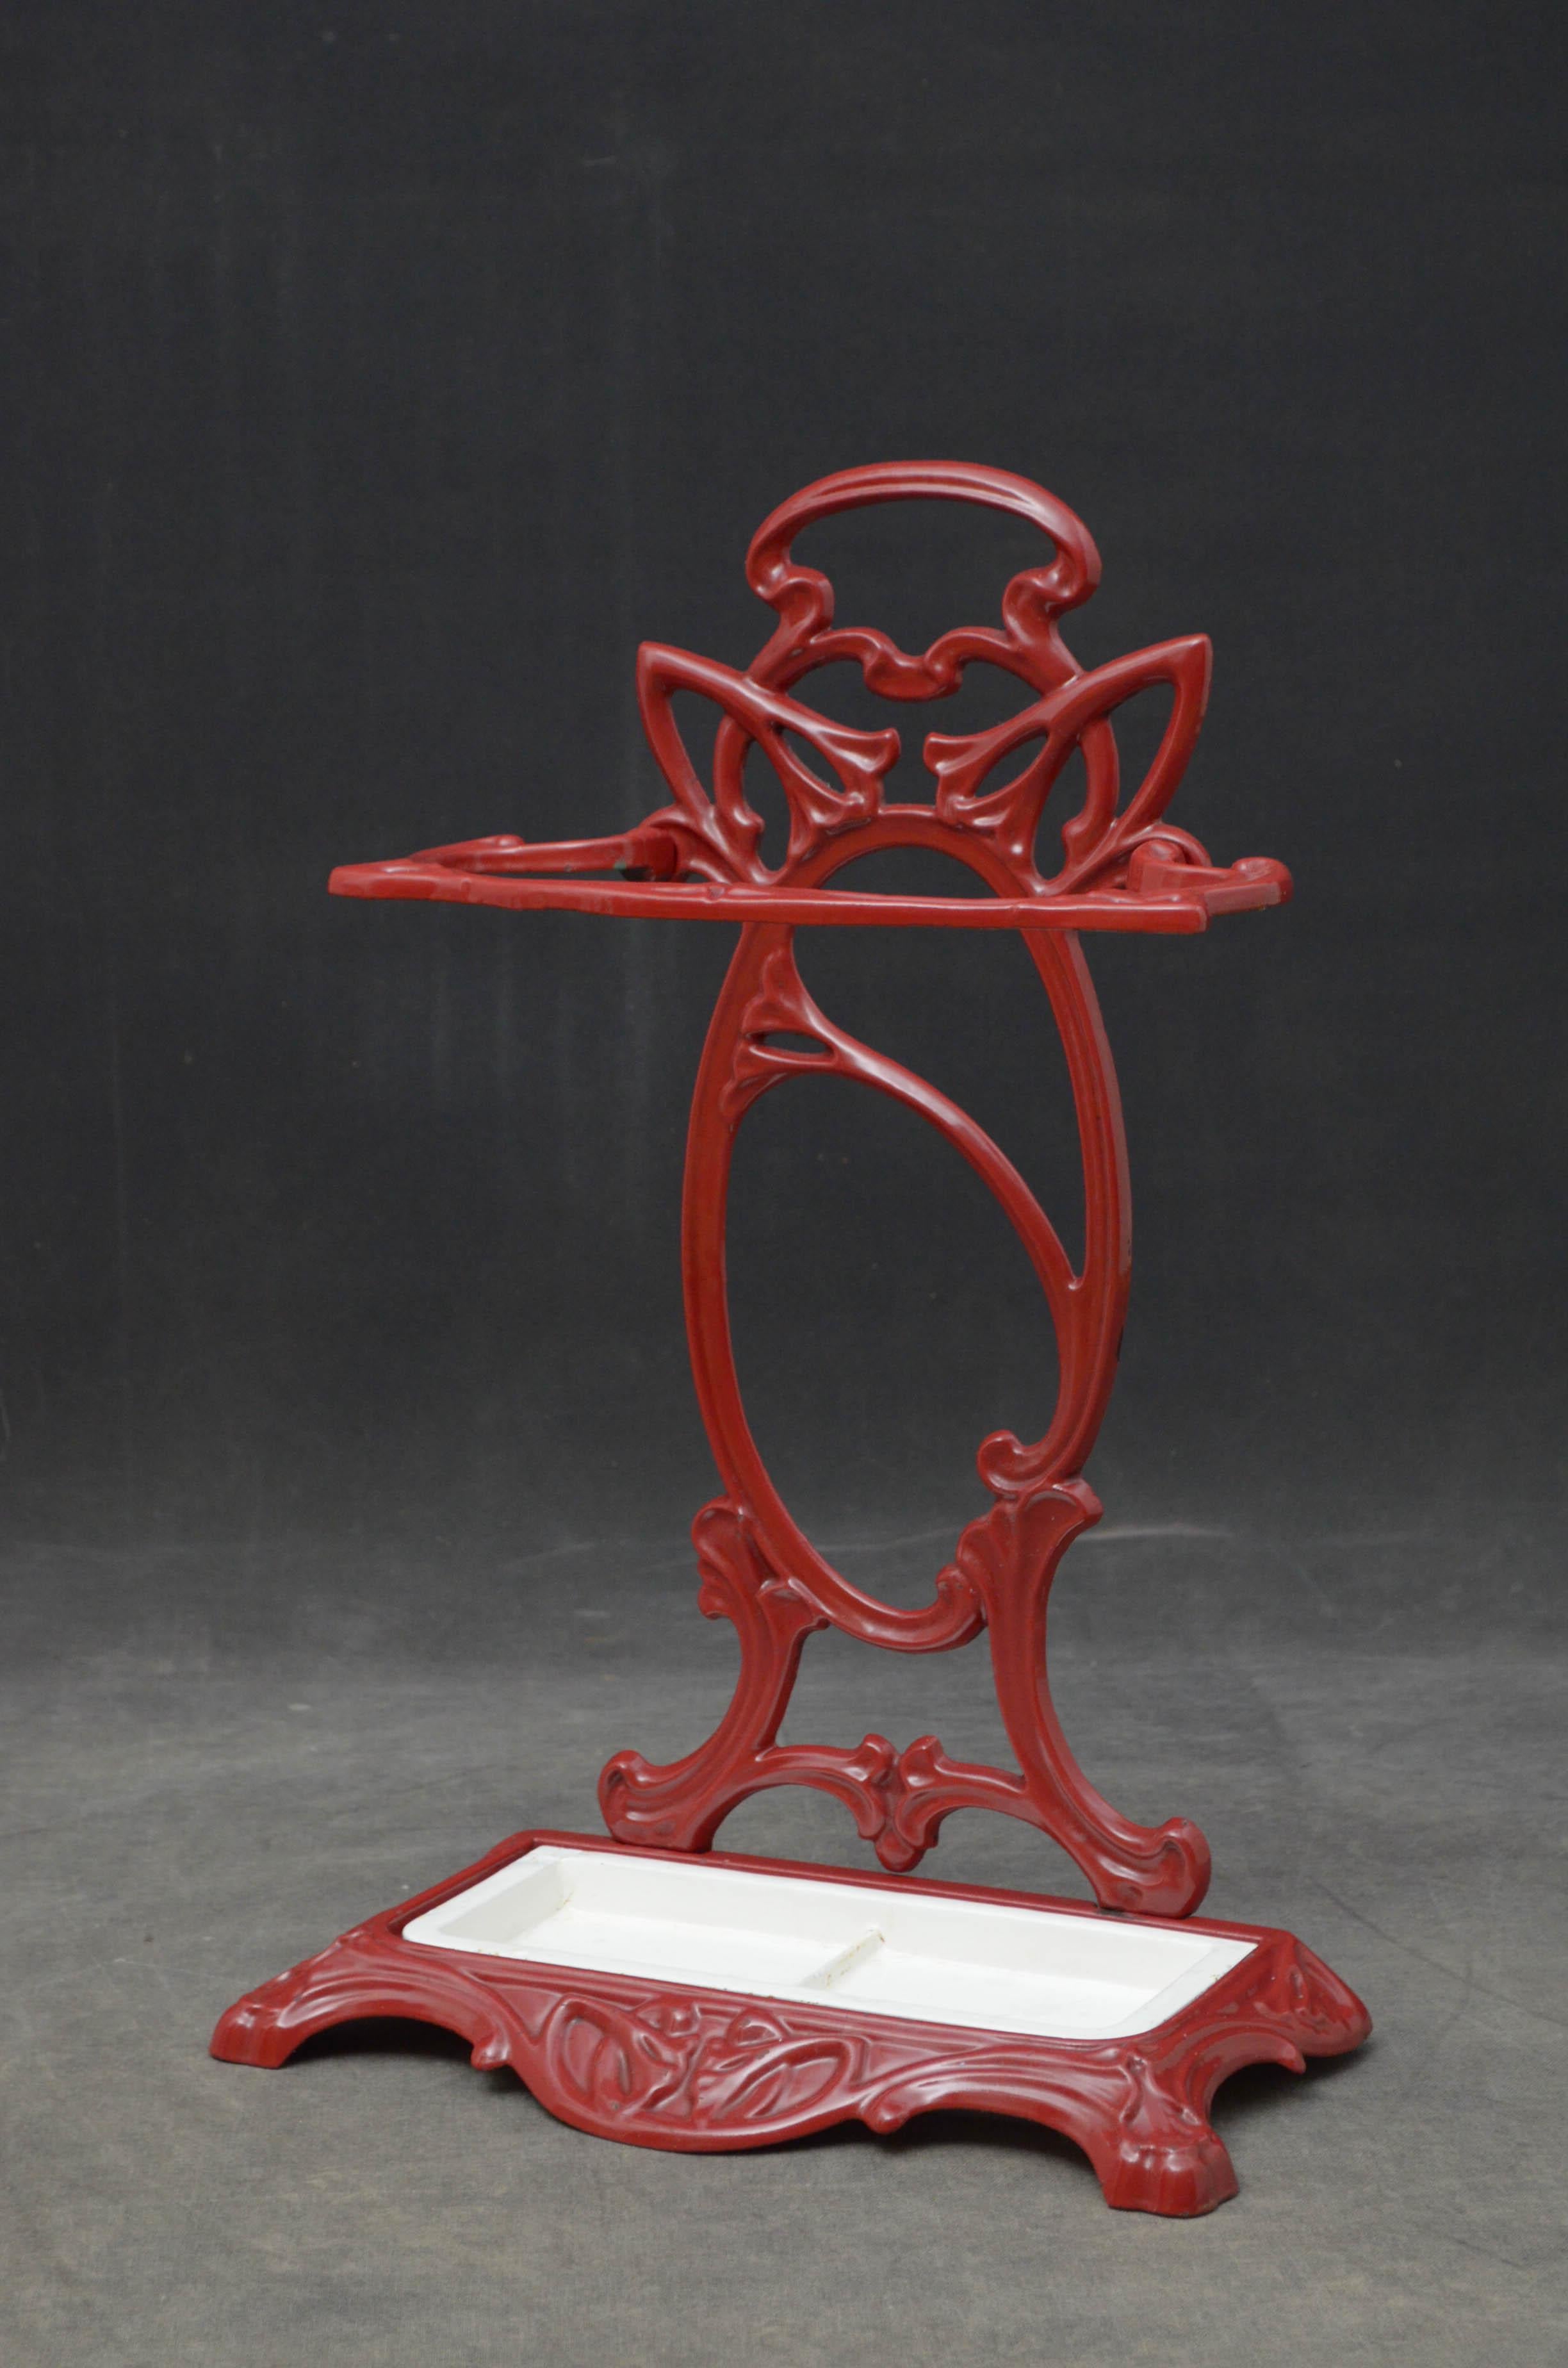 K0471 An exceptional, French Art Nouveau, cast iron umbrella stand / hall stand with flowing organic lines, umbrella holder and removable drip tray, all in beautiful condition throughout, ready to place at home, circa 1900
Measures: H 23.5